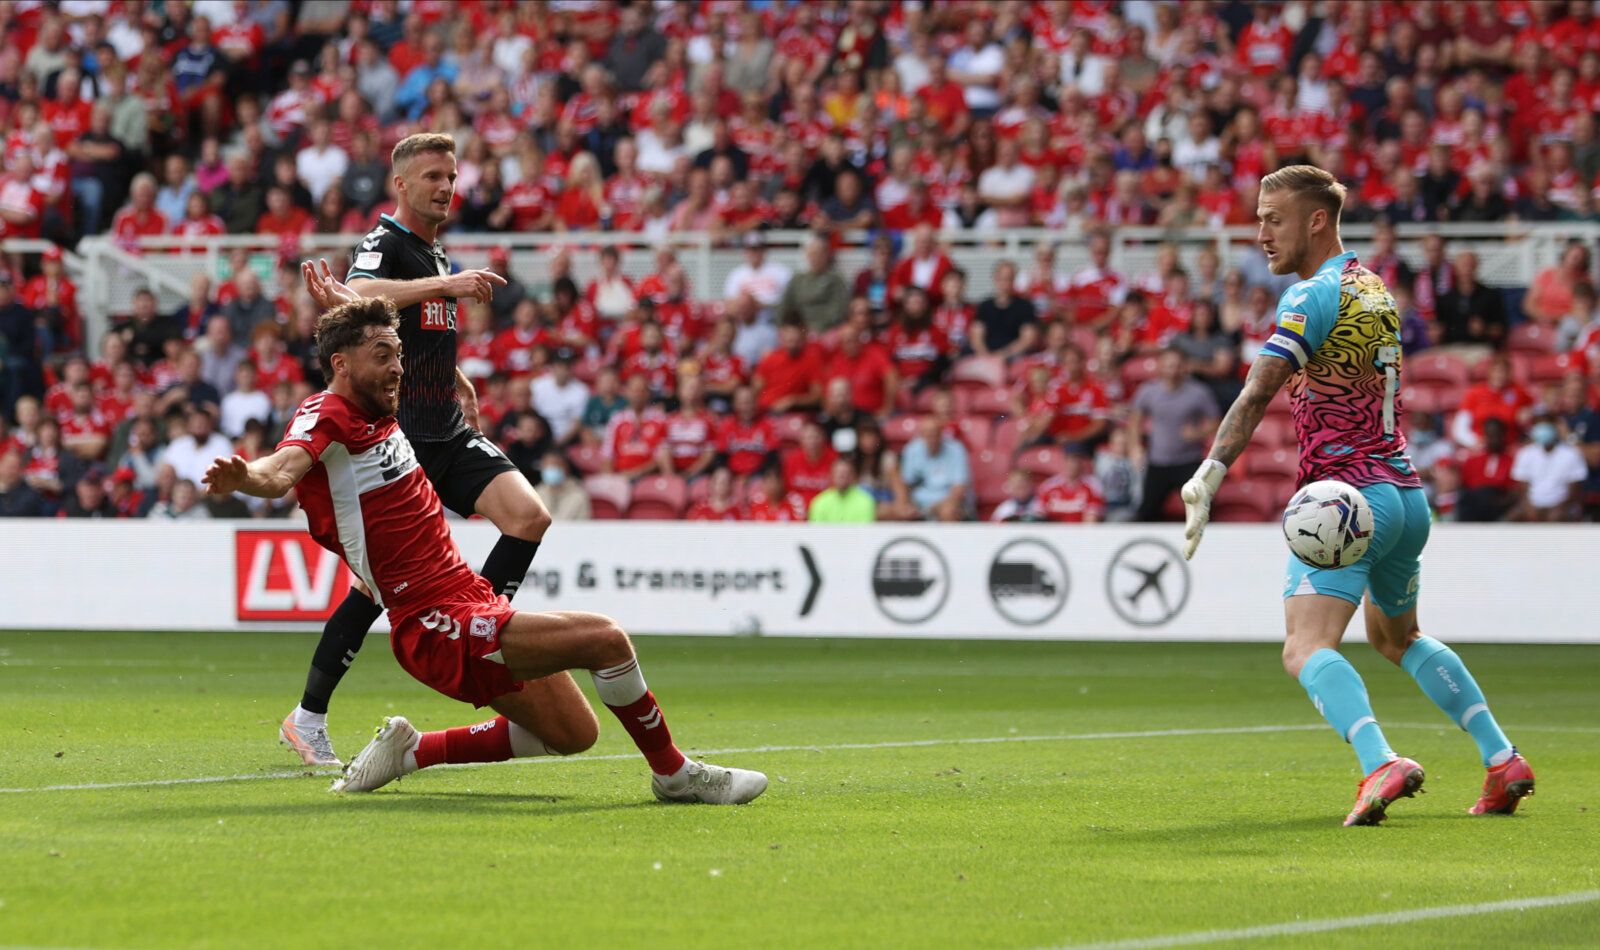 Soccer Football - Championship - Middlesbrough v Bristol City - Riverside Stadium, Middlesbrough, Britain - August 14, 2021 Middlesbrough's Matt Crooks scores their second goal Action Images/Lee Smith EDITORIAL USE ONLY. No use with unauthorized audio, video, data, fixture lists, club/league logos or 'live' services. Online in-match use limited to 75 images, no video emulation. No use in betting, games or single club /league/player publications.  Please contact your account representative for fu